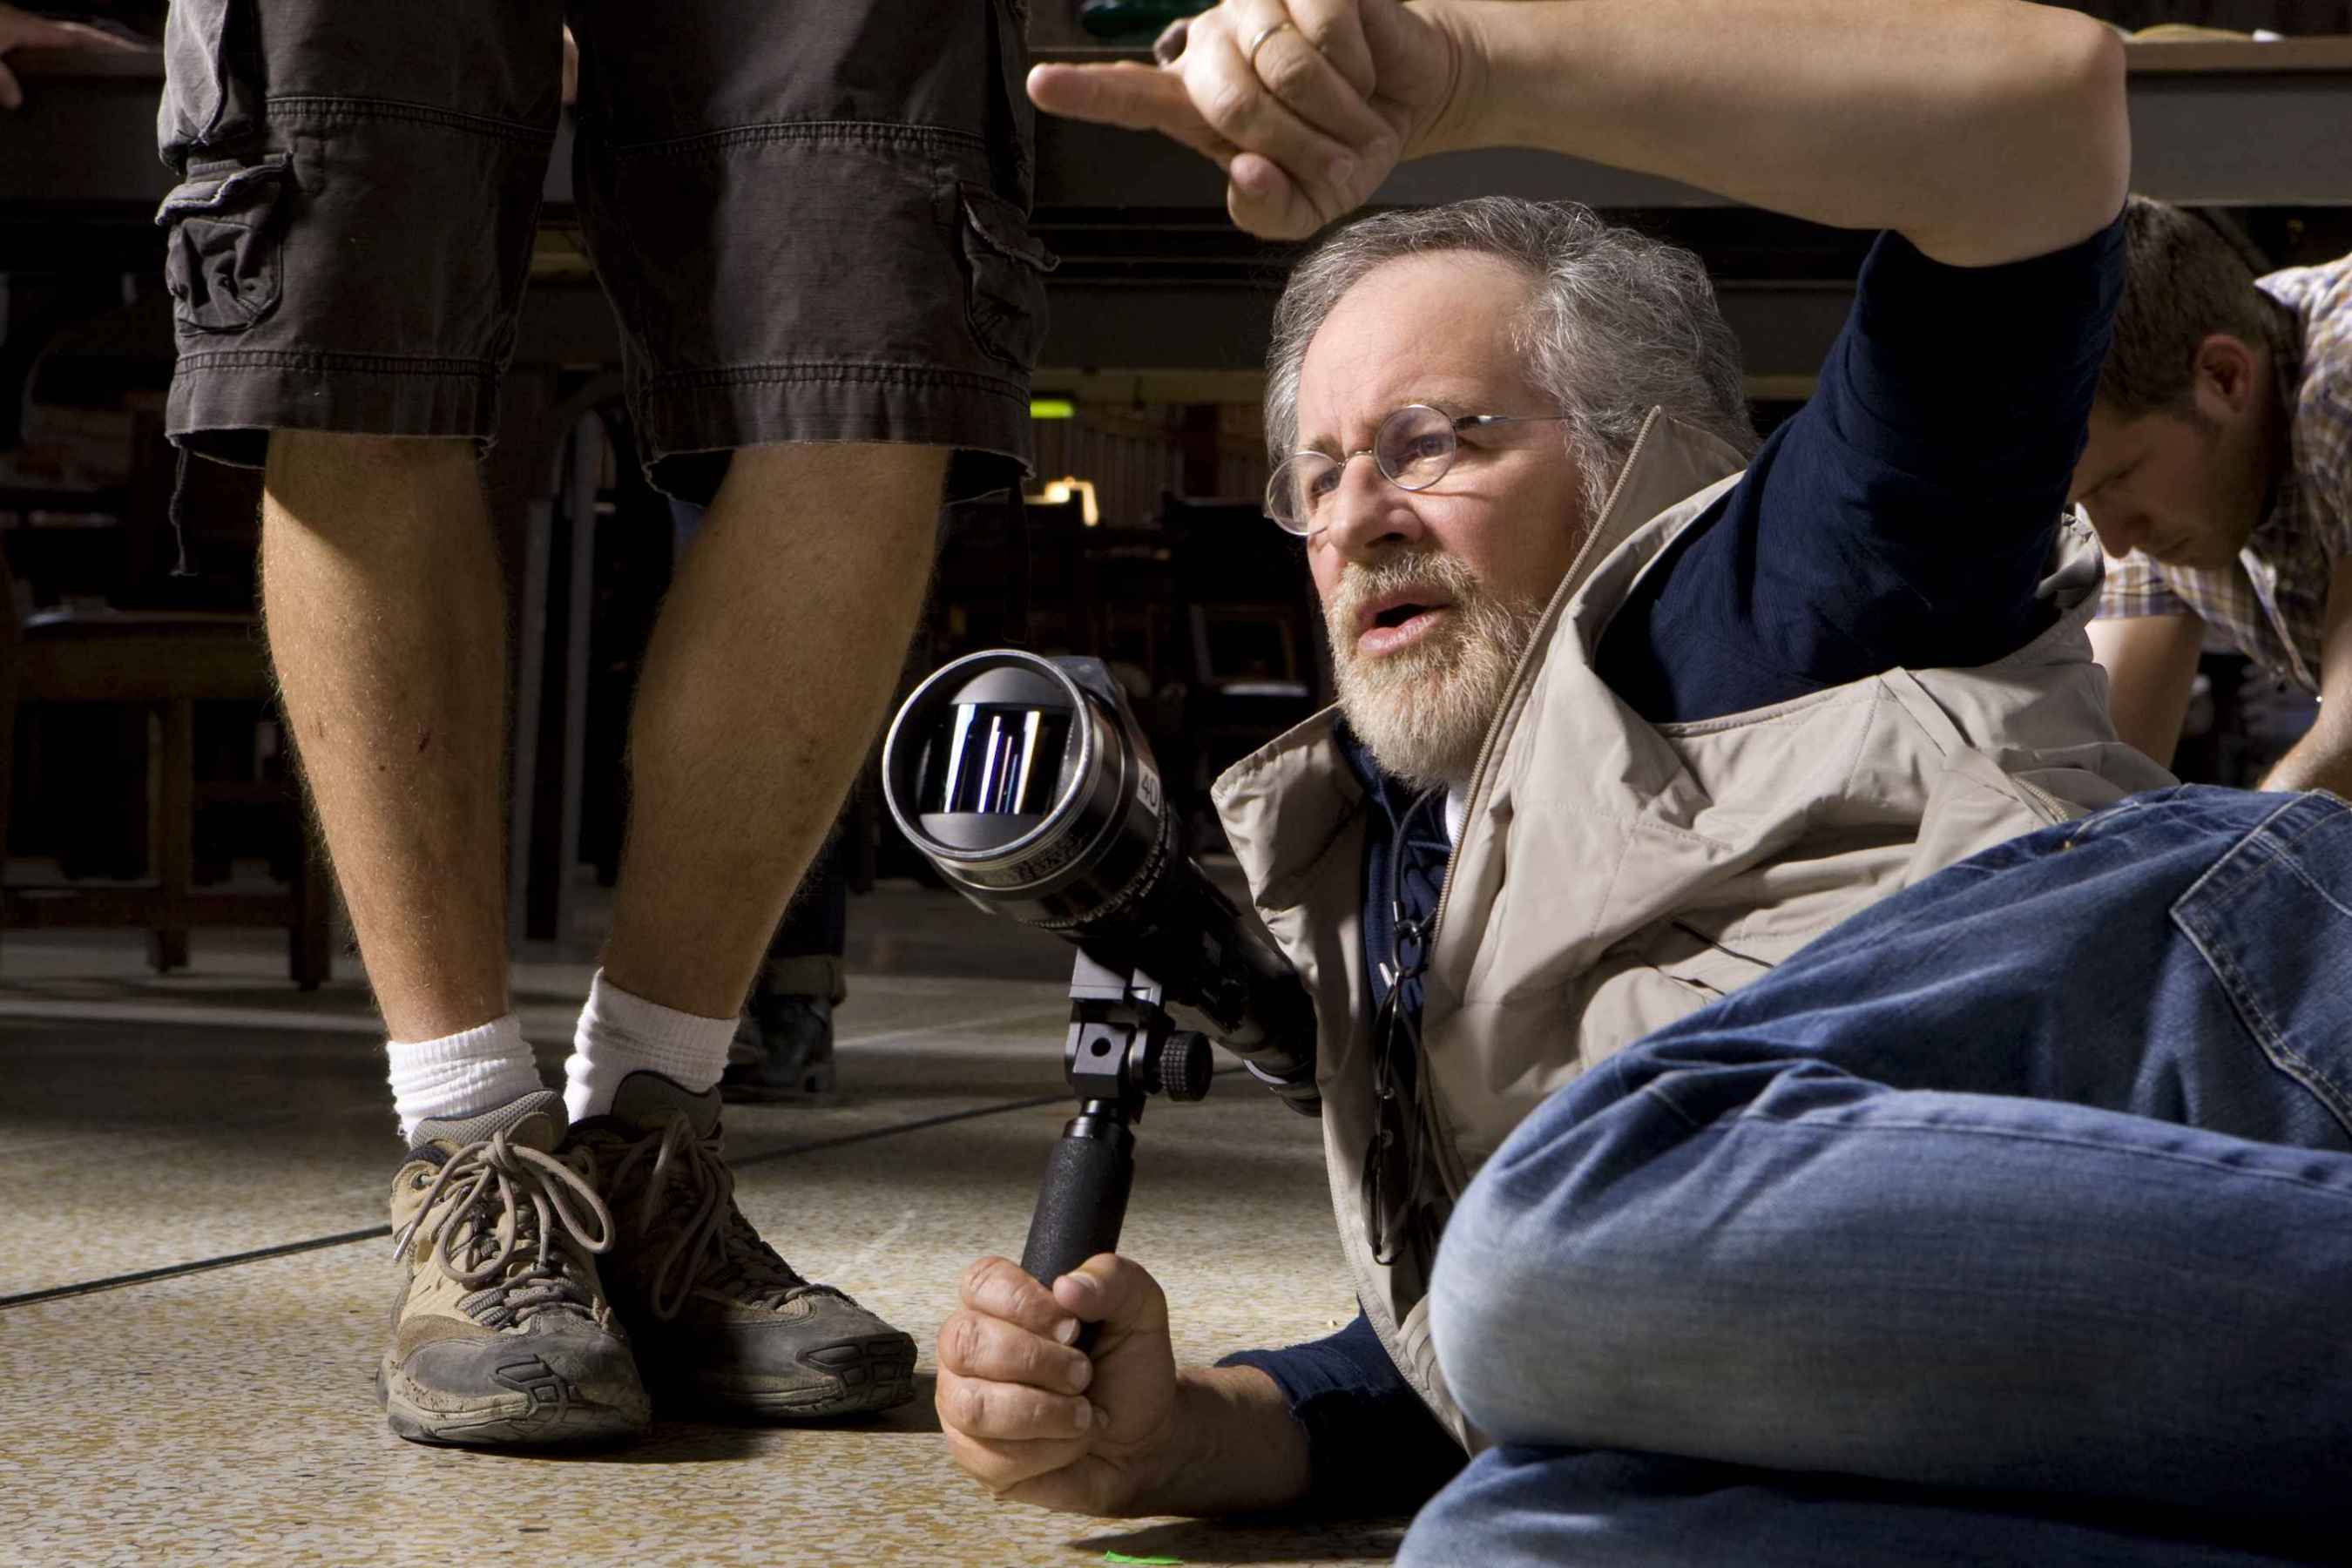 Ranking the Possibilities of Which Film Steven Spielberg Will Direct Next